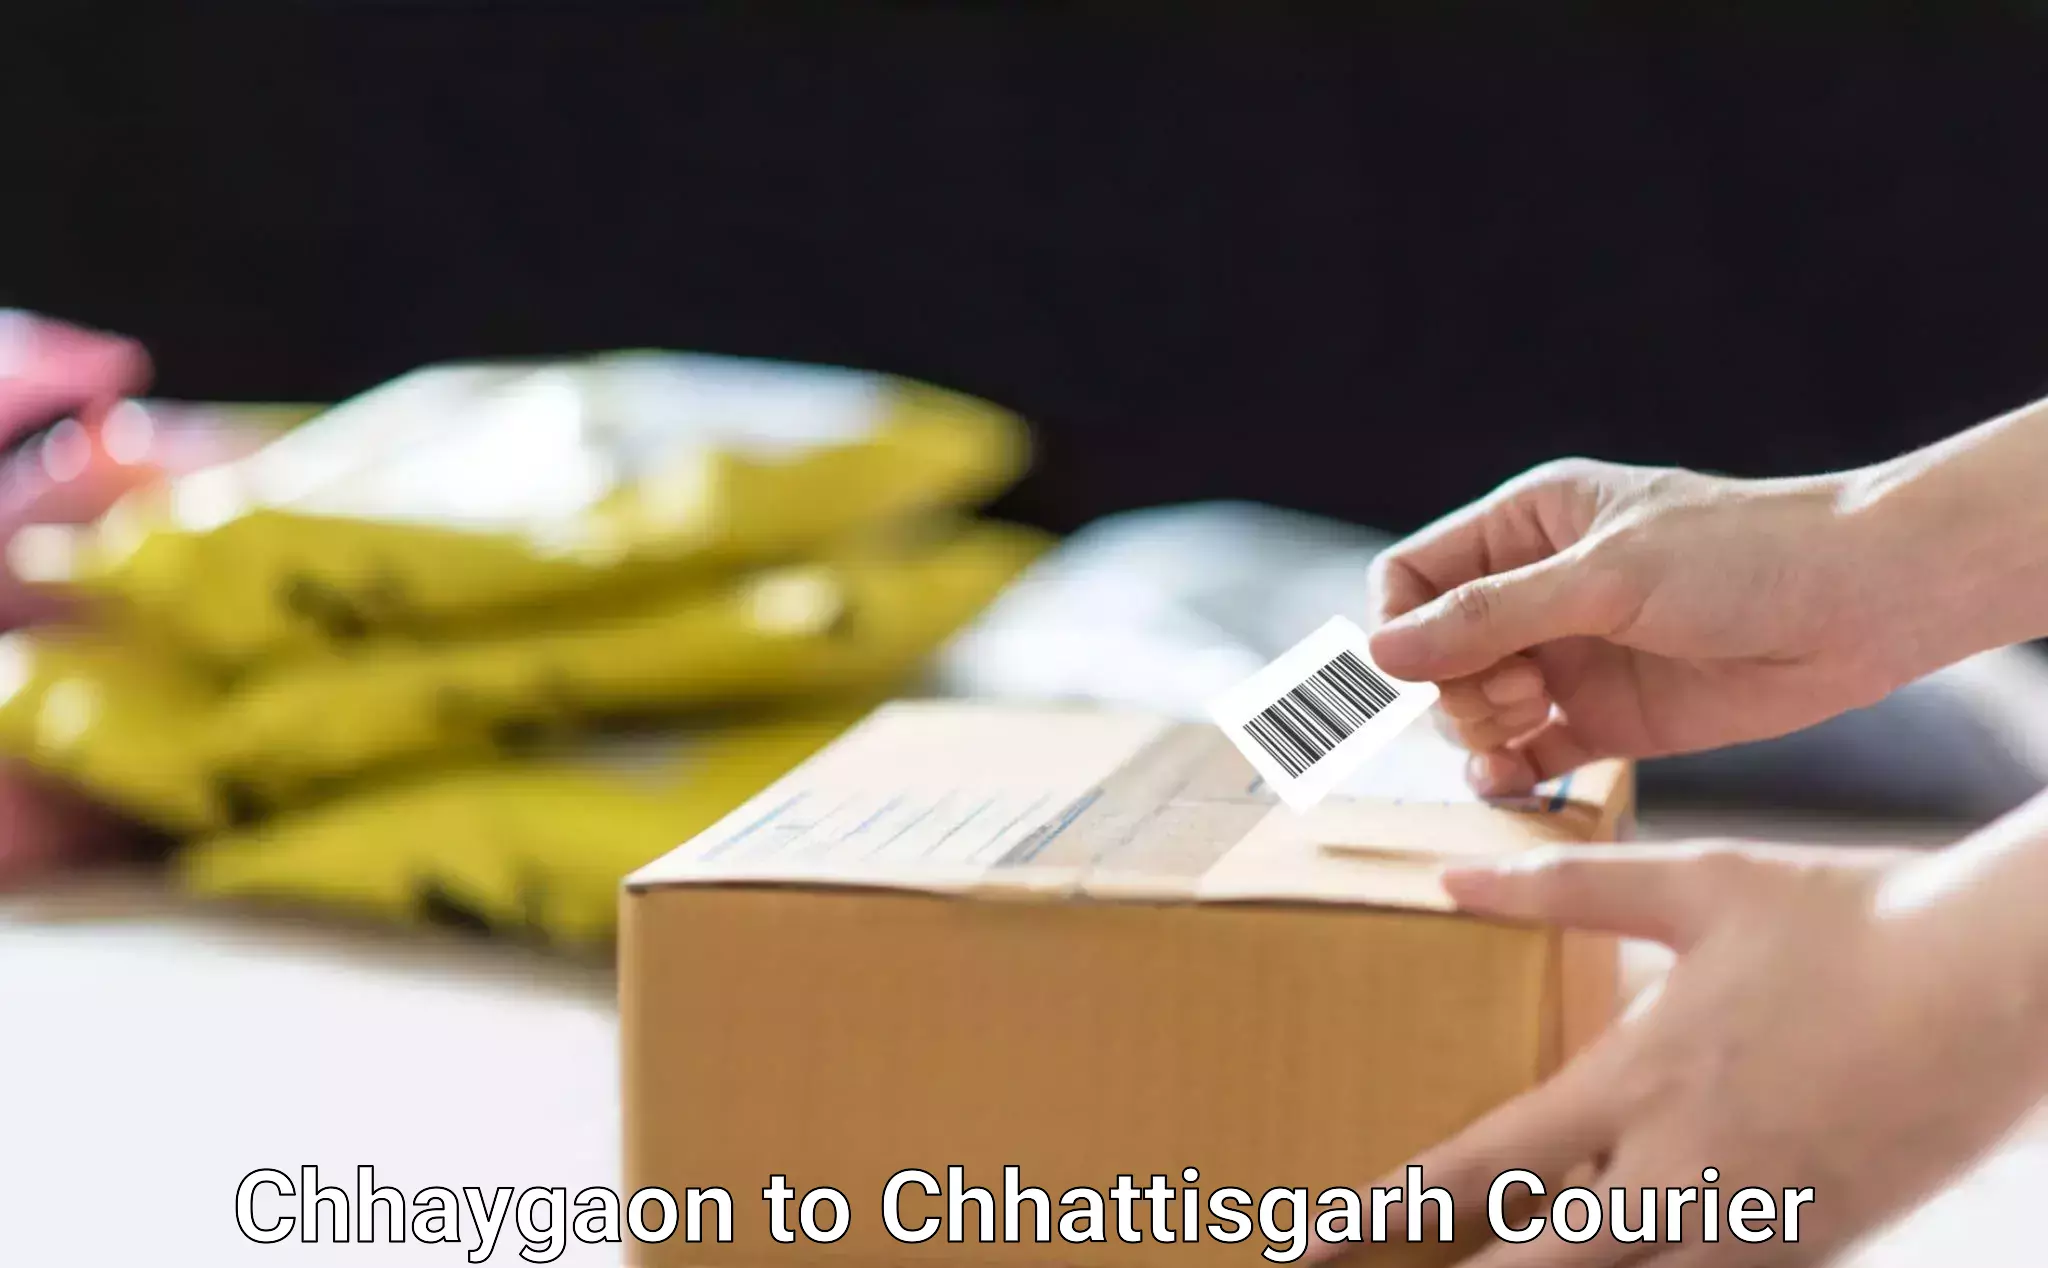 Parcel handling and care Chhaygaon to Chhattisgarh